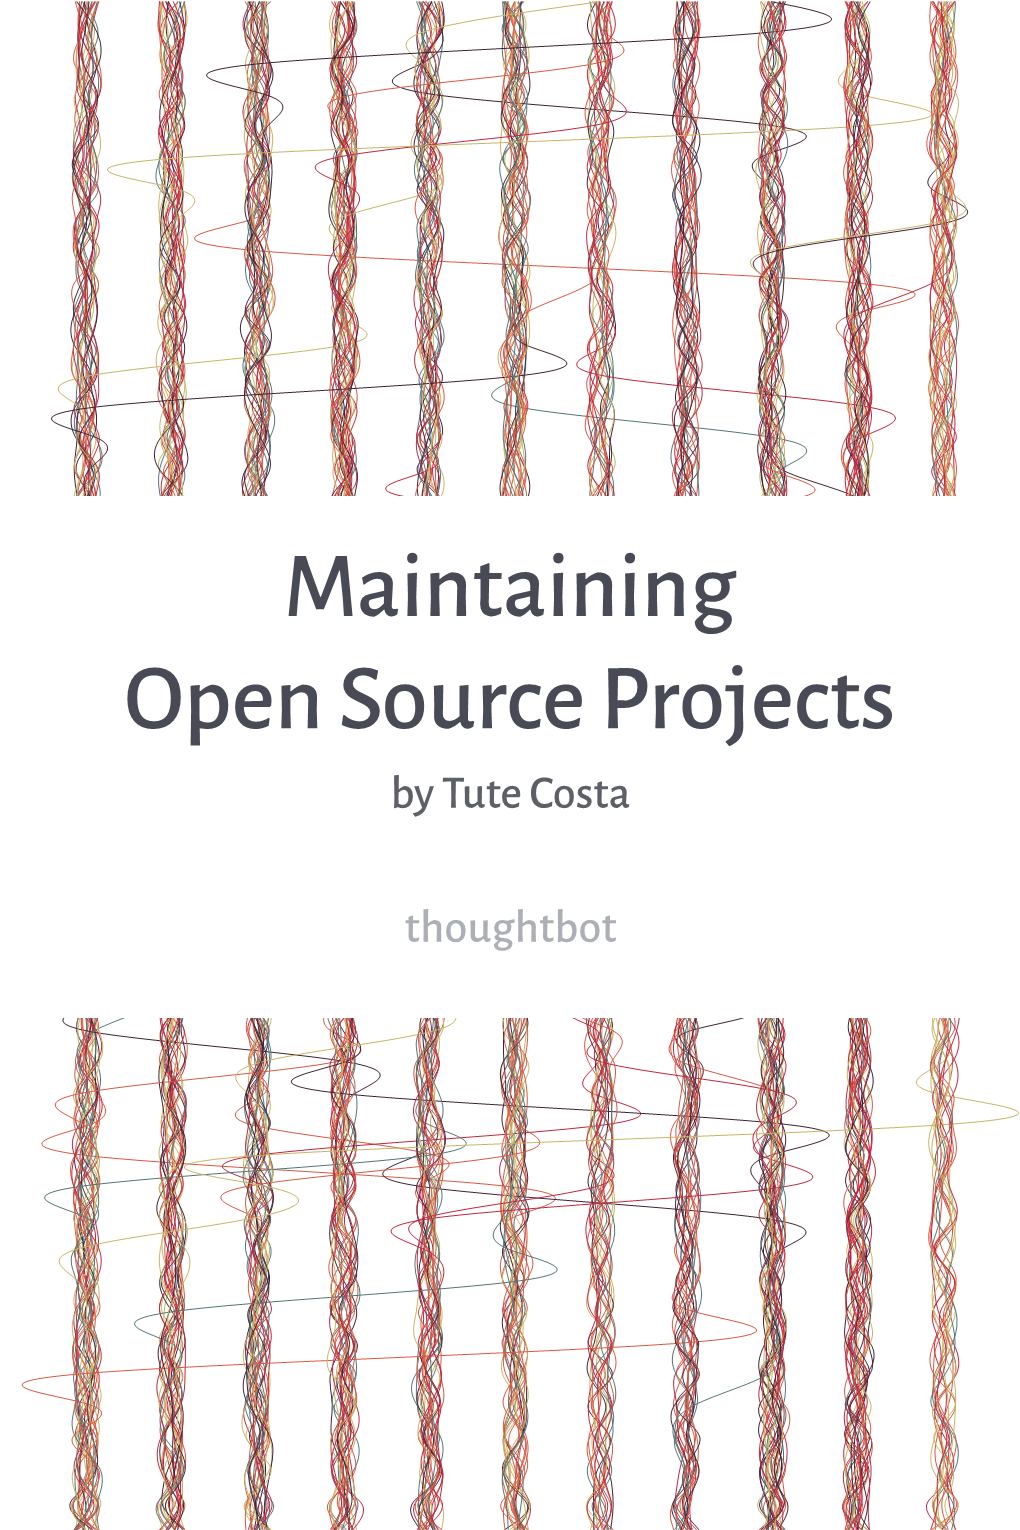 Maintaining Open Source Projects by Tute Costa